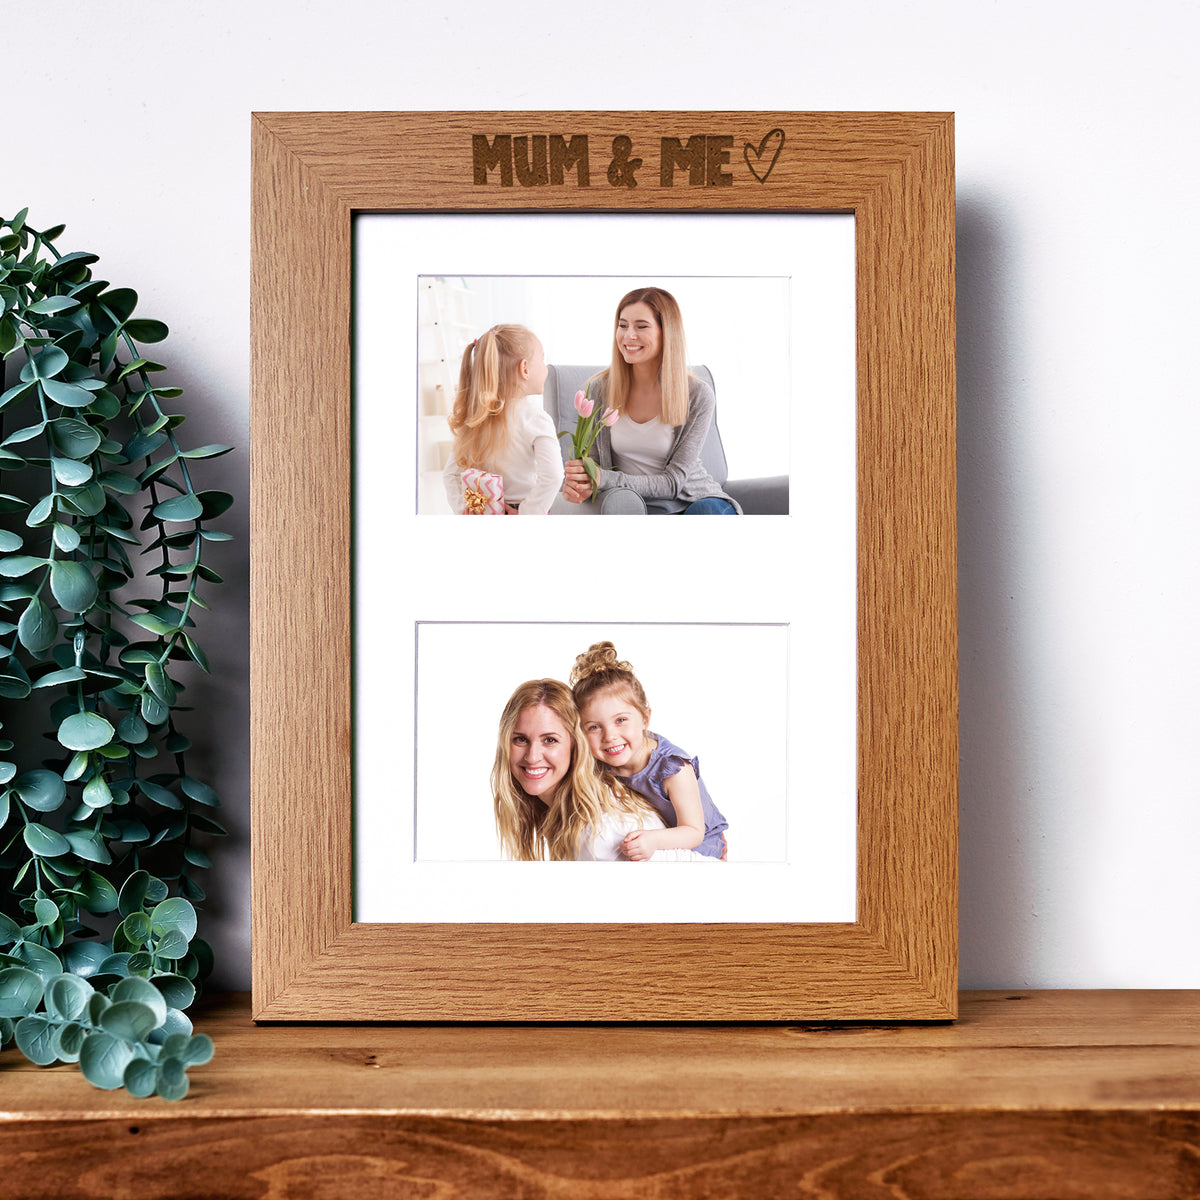 Mum and Me Photo Picture Frame Double 6x4 Inch Landscape